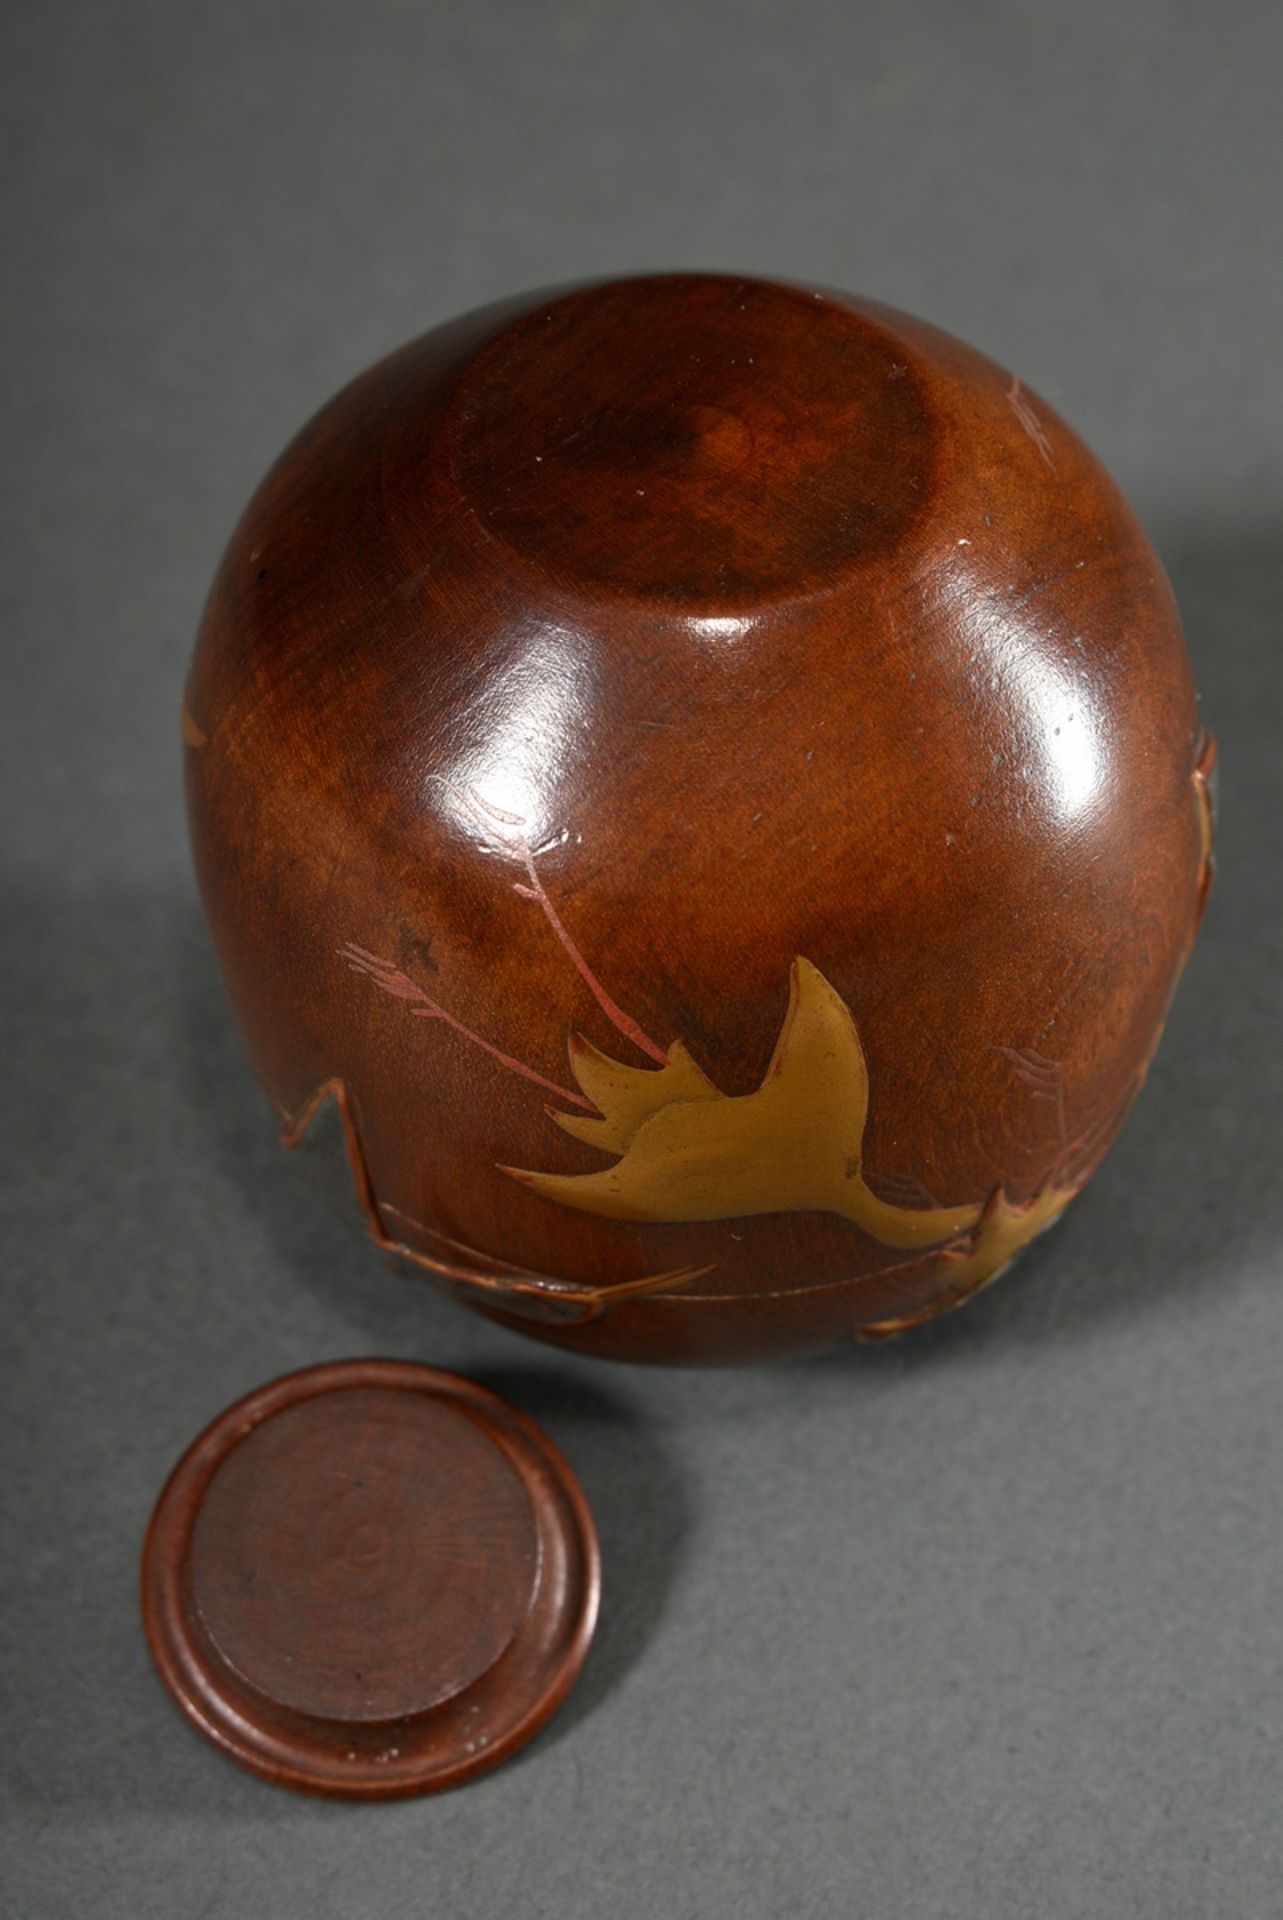 Japanese boxwood "Natsume" tea caddy with lacquer and mother-of-pearl inlays "7 Cranes", Meiji/Show - Image 6 of 6